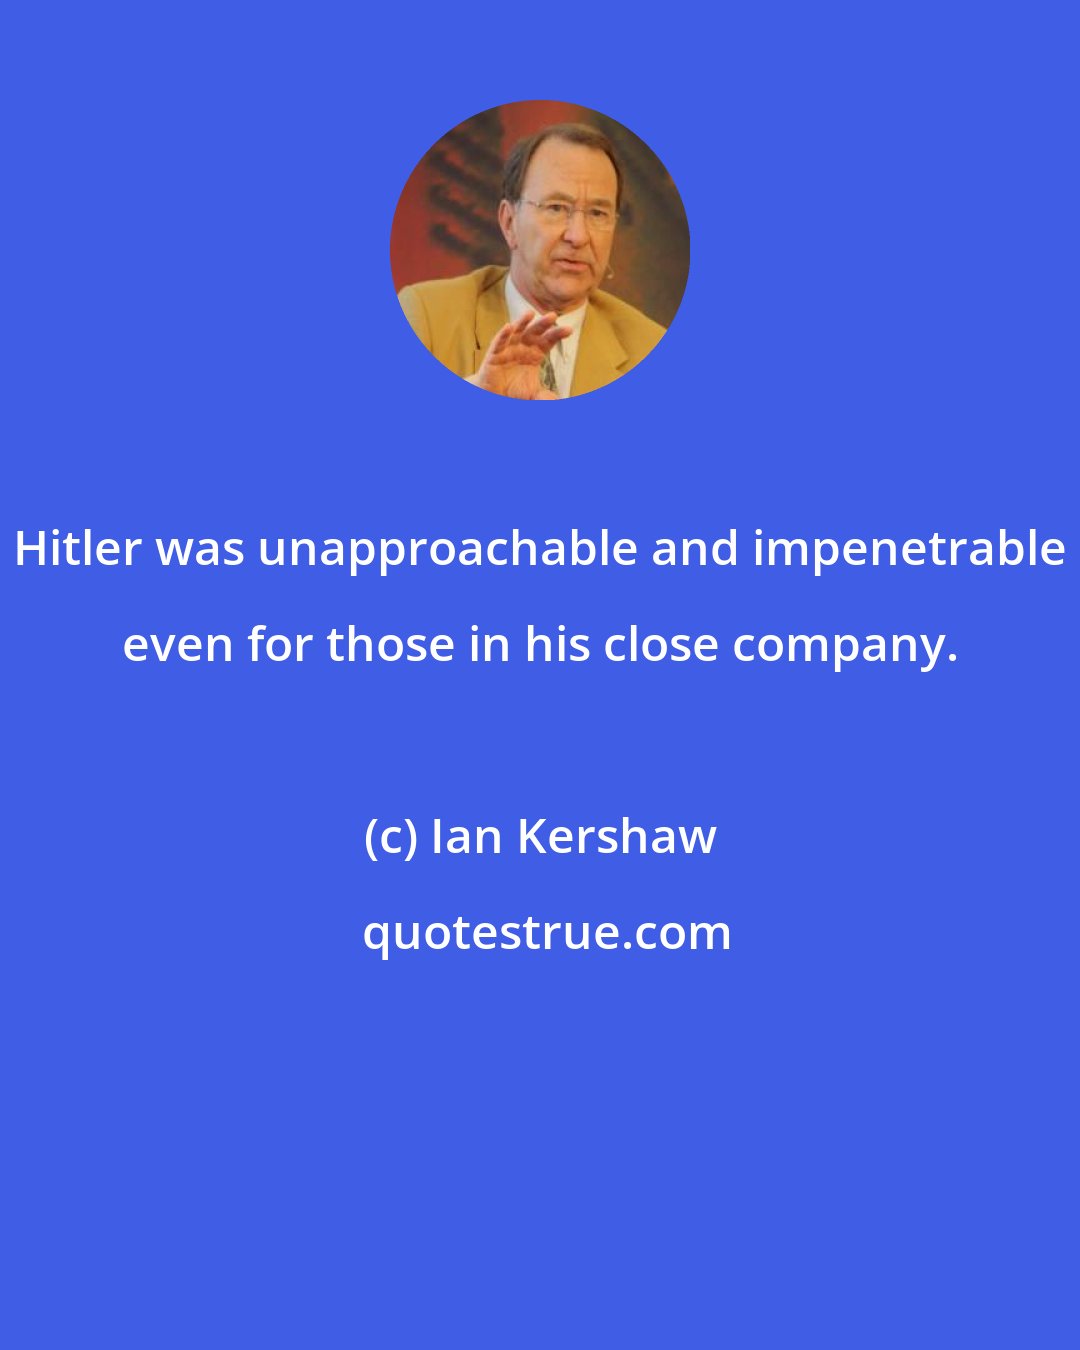 Ian Kershaw: Hitler was unapproachable and impenetrable even for those in his close company.